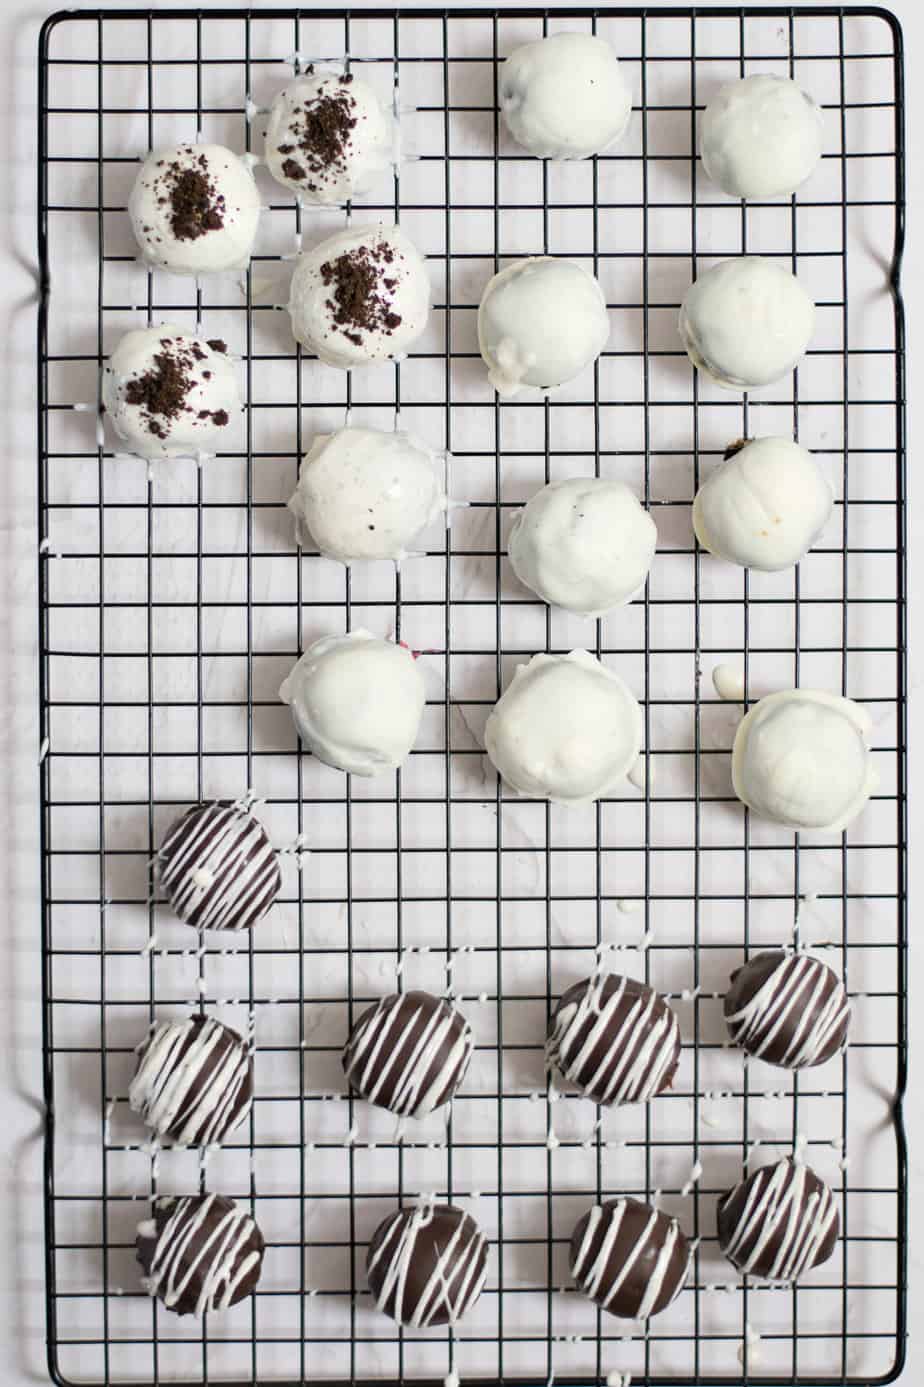 Oreo balls on a wire rack from above, some dipped in chocolate and some dipped in white chocolate with various Oreo crumb and chocolate drizzle toppings.